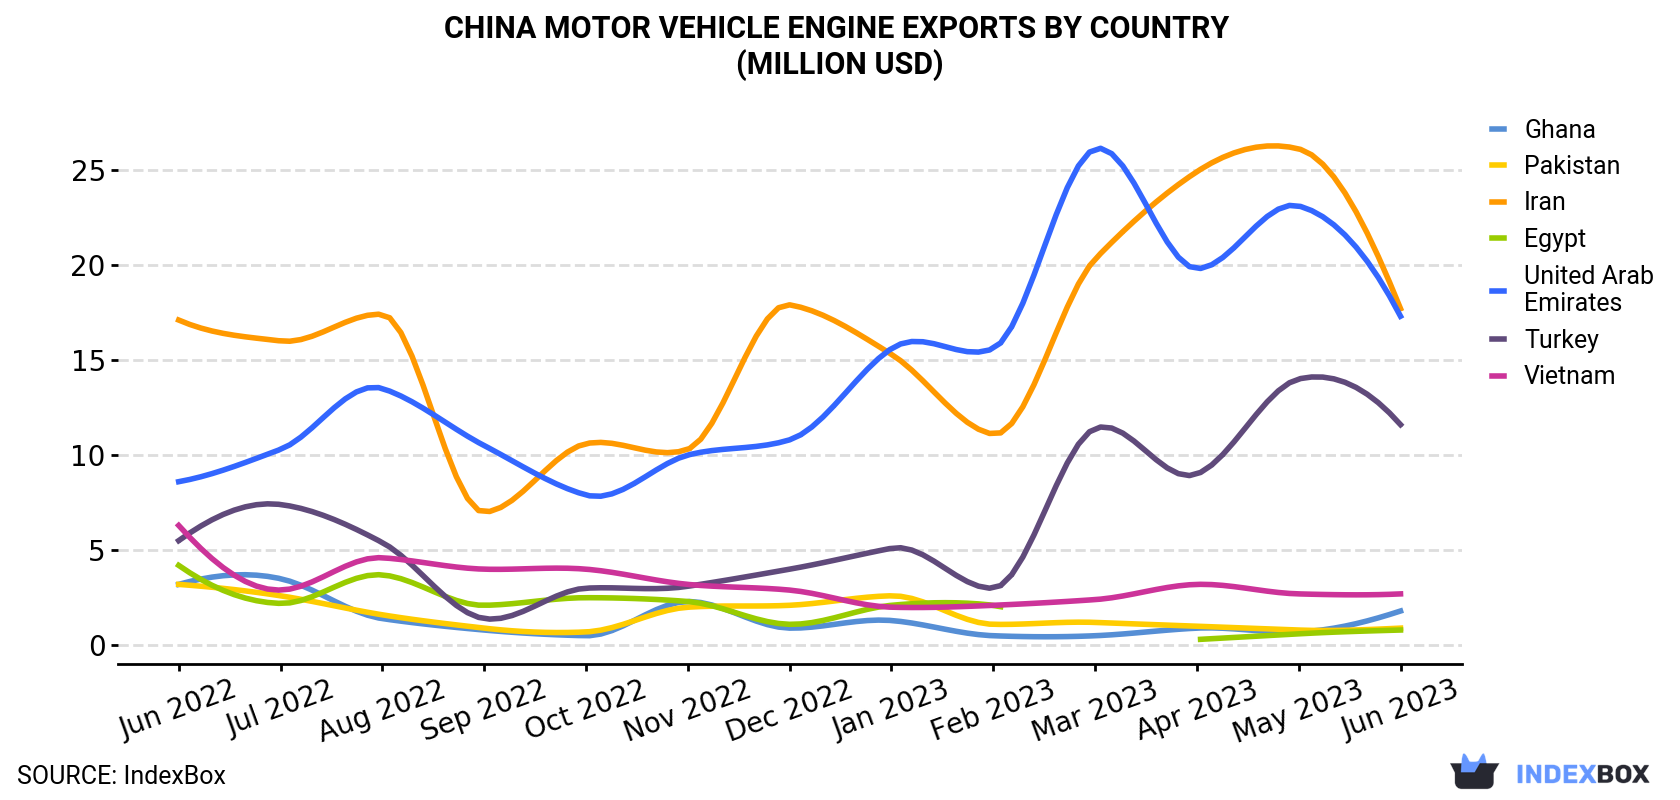 China Motor Vehicle Engine Exports By Country (Million USD)